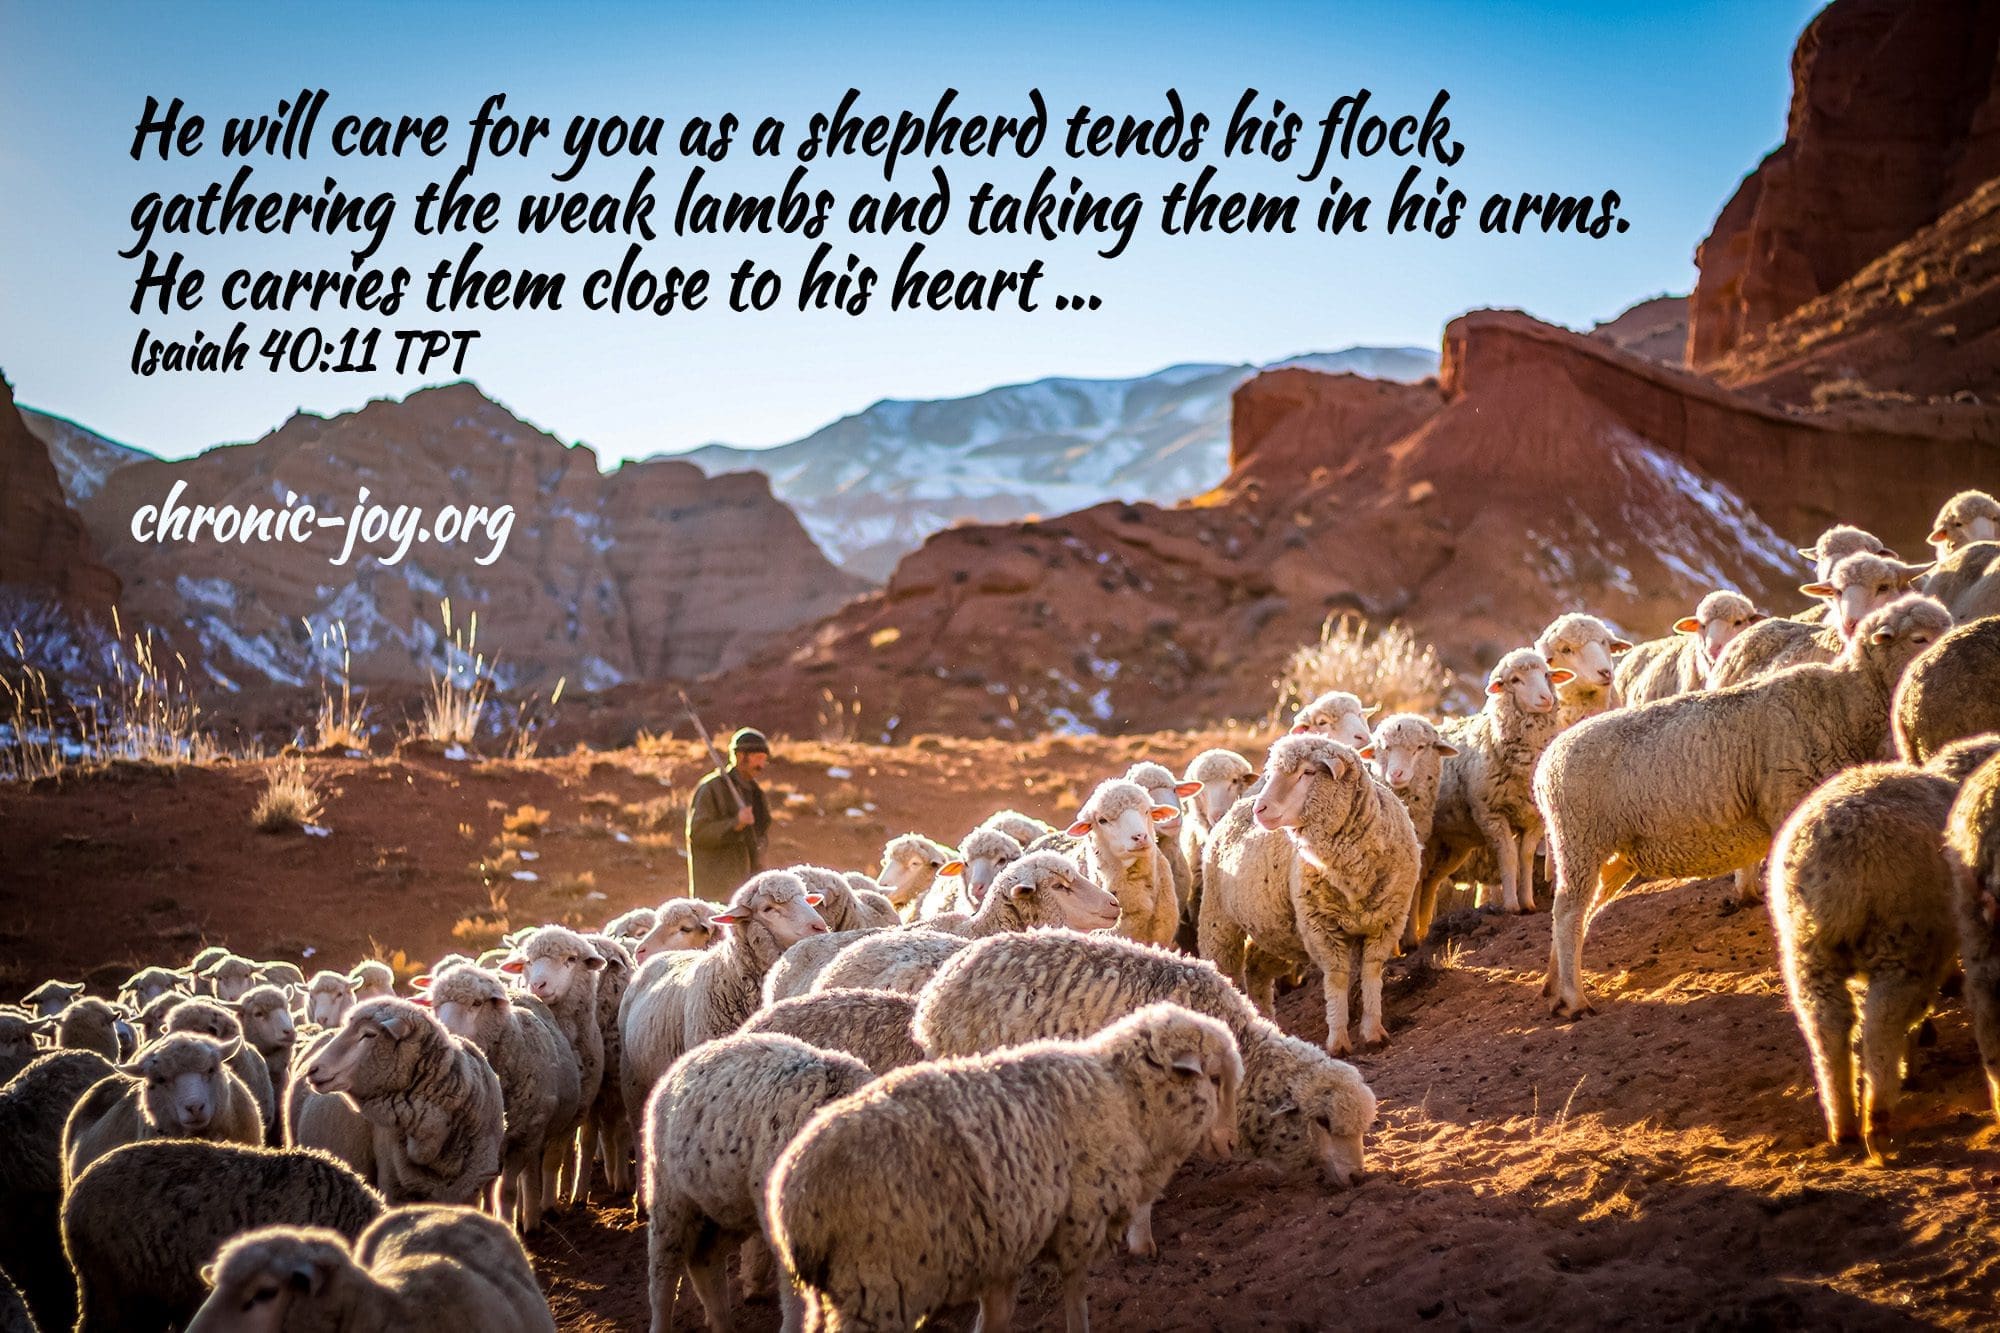 "He will care for you as a shepherd tends his flock, gathering the weak lambs and taking them in his arms. He carries them close to his heart ..." Isaiah 40:11 TPT